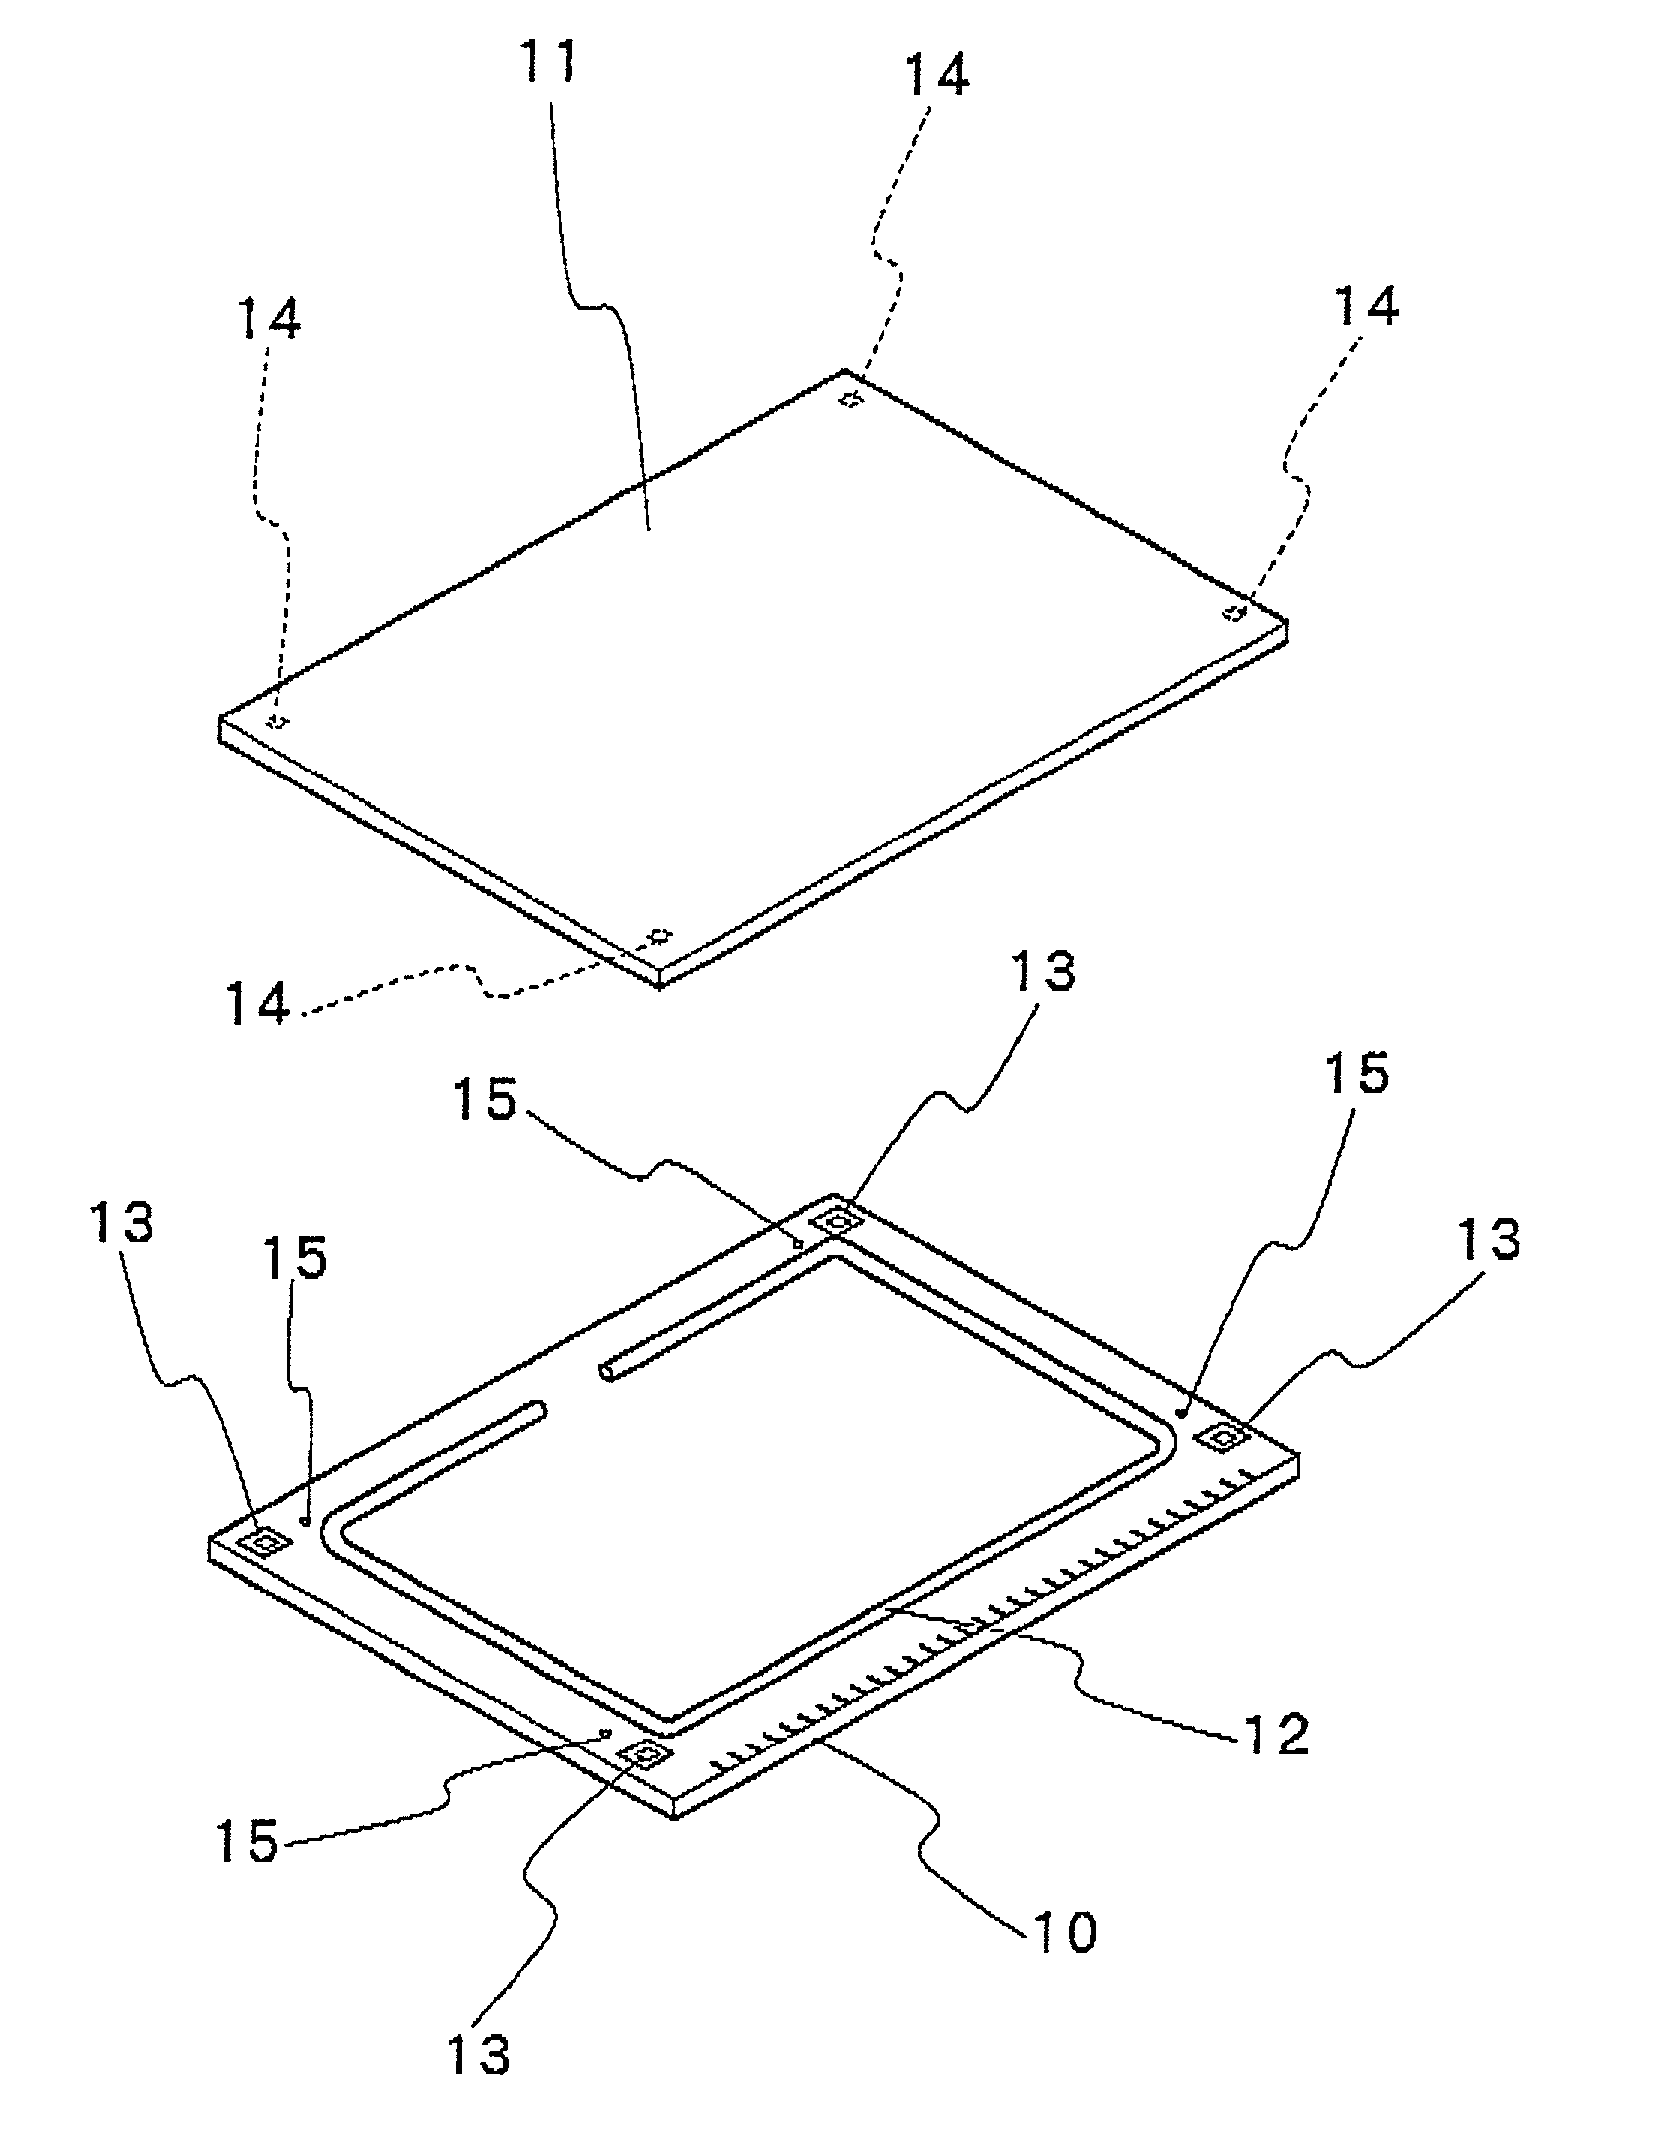 Method and apparatus for bonding substrate plates together through gap-forming sealer material